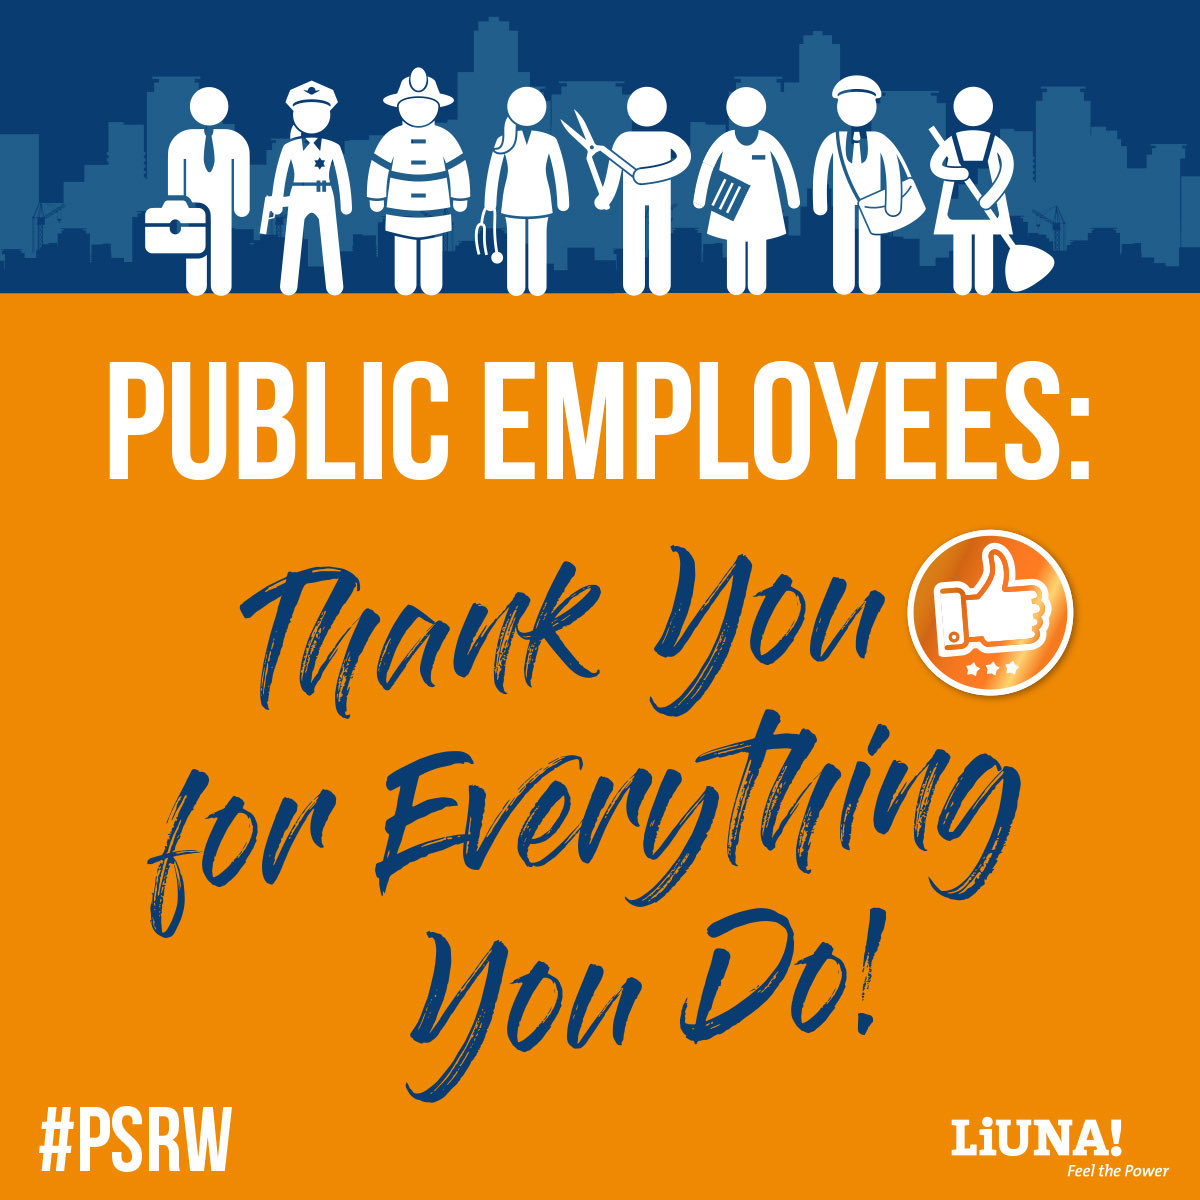 During #PublicServiceRecognitionWeek we honor the invaluable contributions of our dedicated Public Employees and Non-Construction Members.  Your tireless work strengthens communities and shapes our nation.  THANK YOU for your hard work and service! #PSRW #FeelThePower